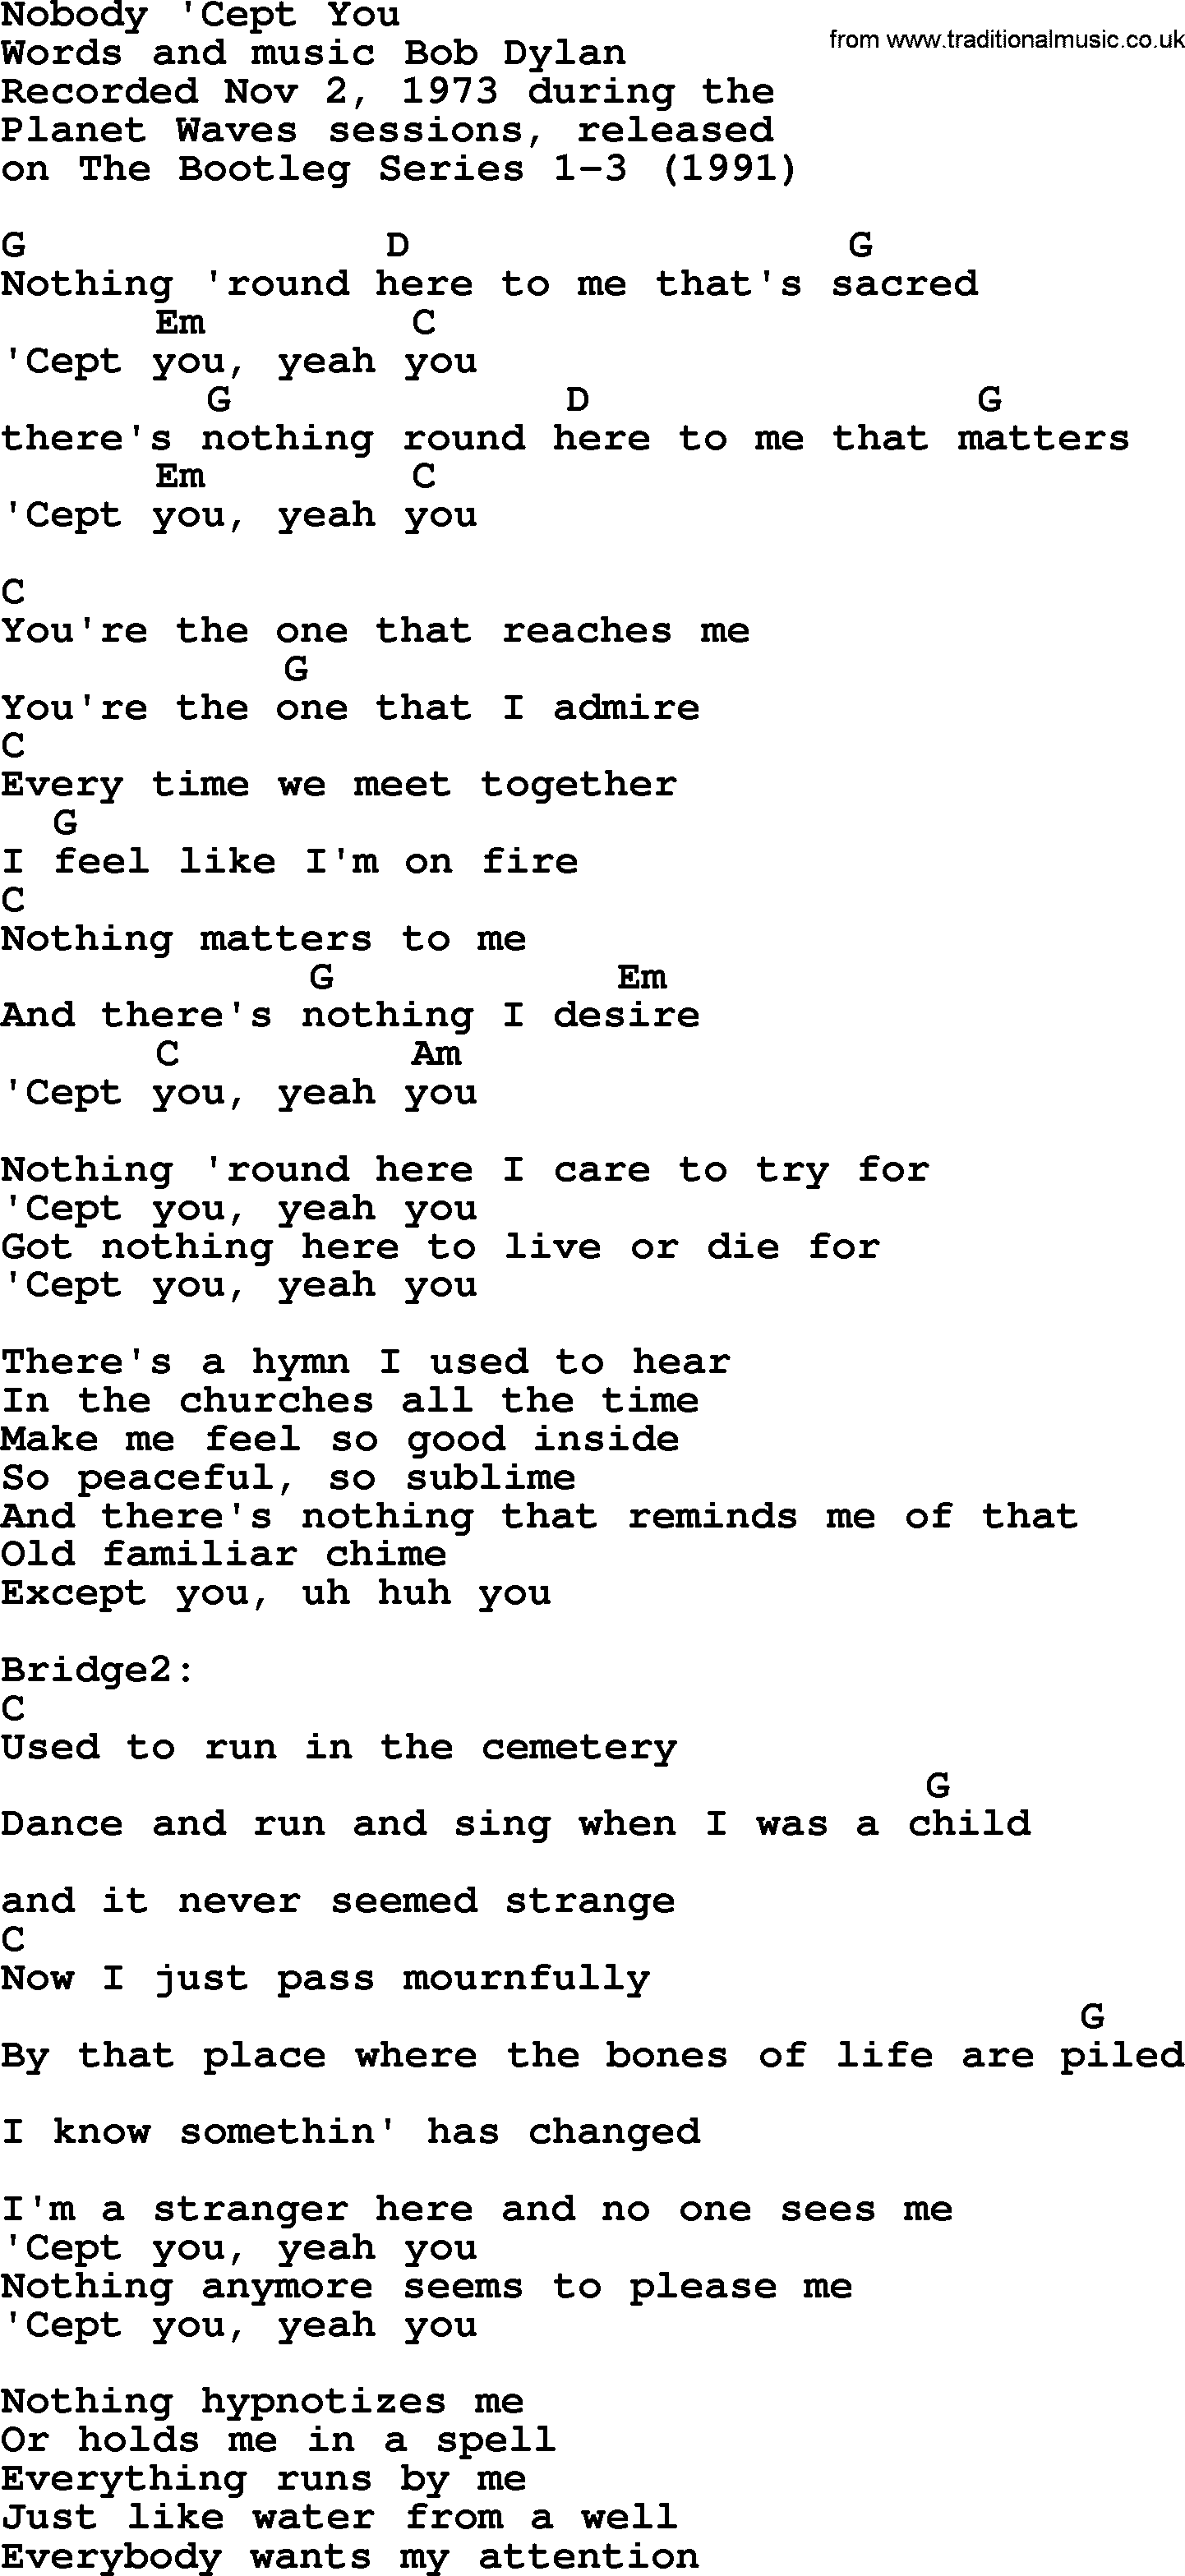 Bob Dylan song, lyrics with chords - Nobody 'Cept You